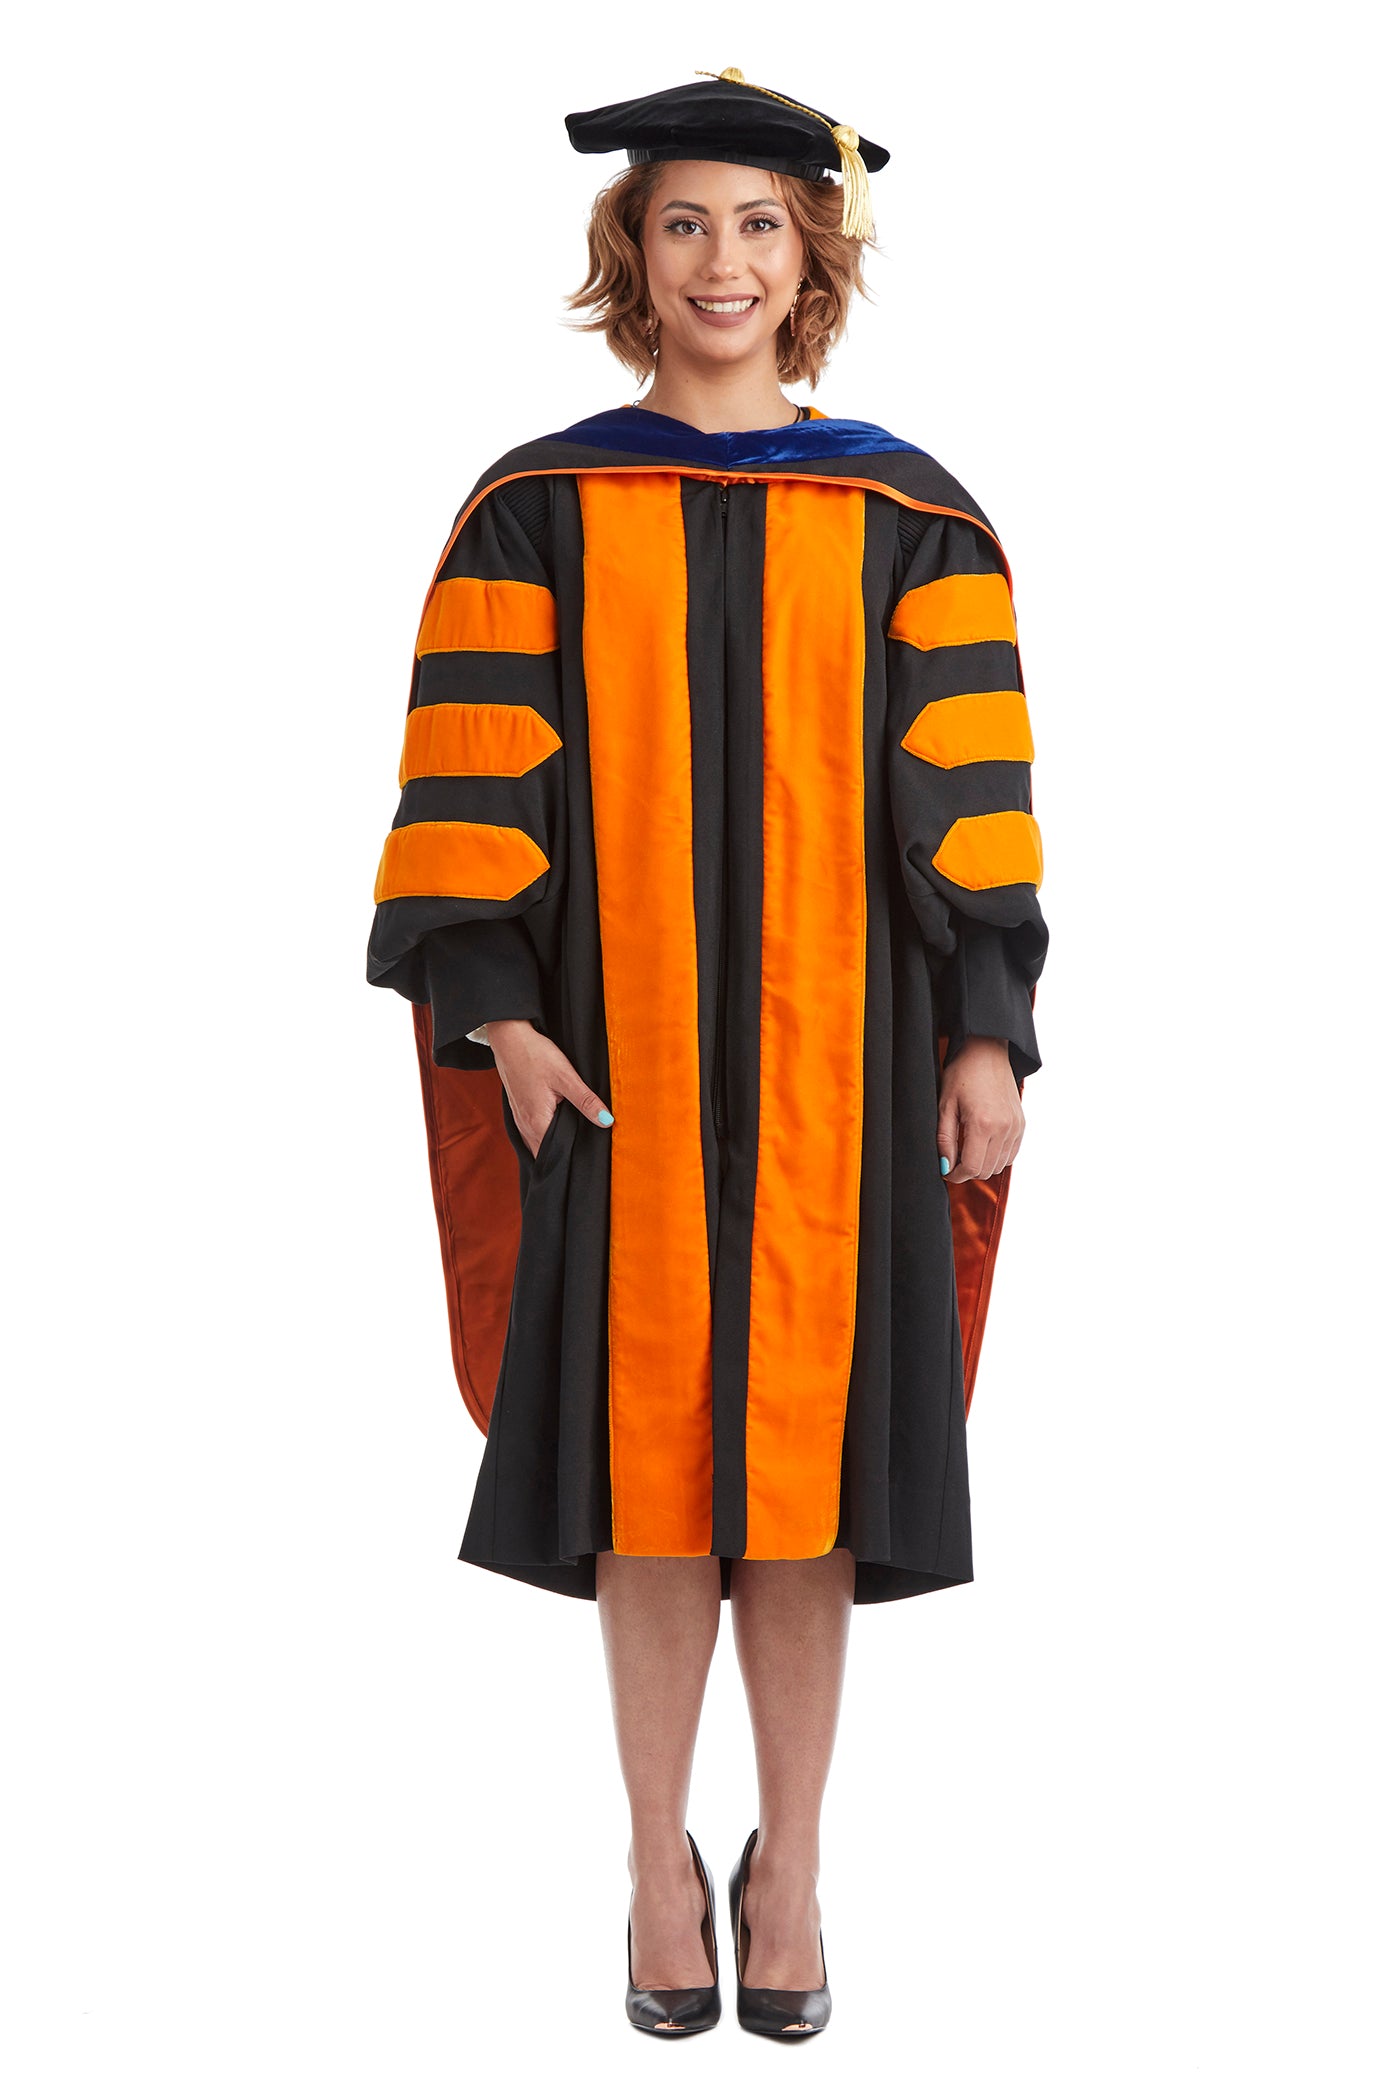 Buy MODERNAZ Graduation gown for kids with cape color (Red, Yellow) Degree gown  costume for convocation for boys & girls (combo 2 pack) (2-3 Years) Online  at Low Prices in India - Amazon.in